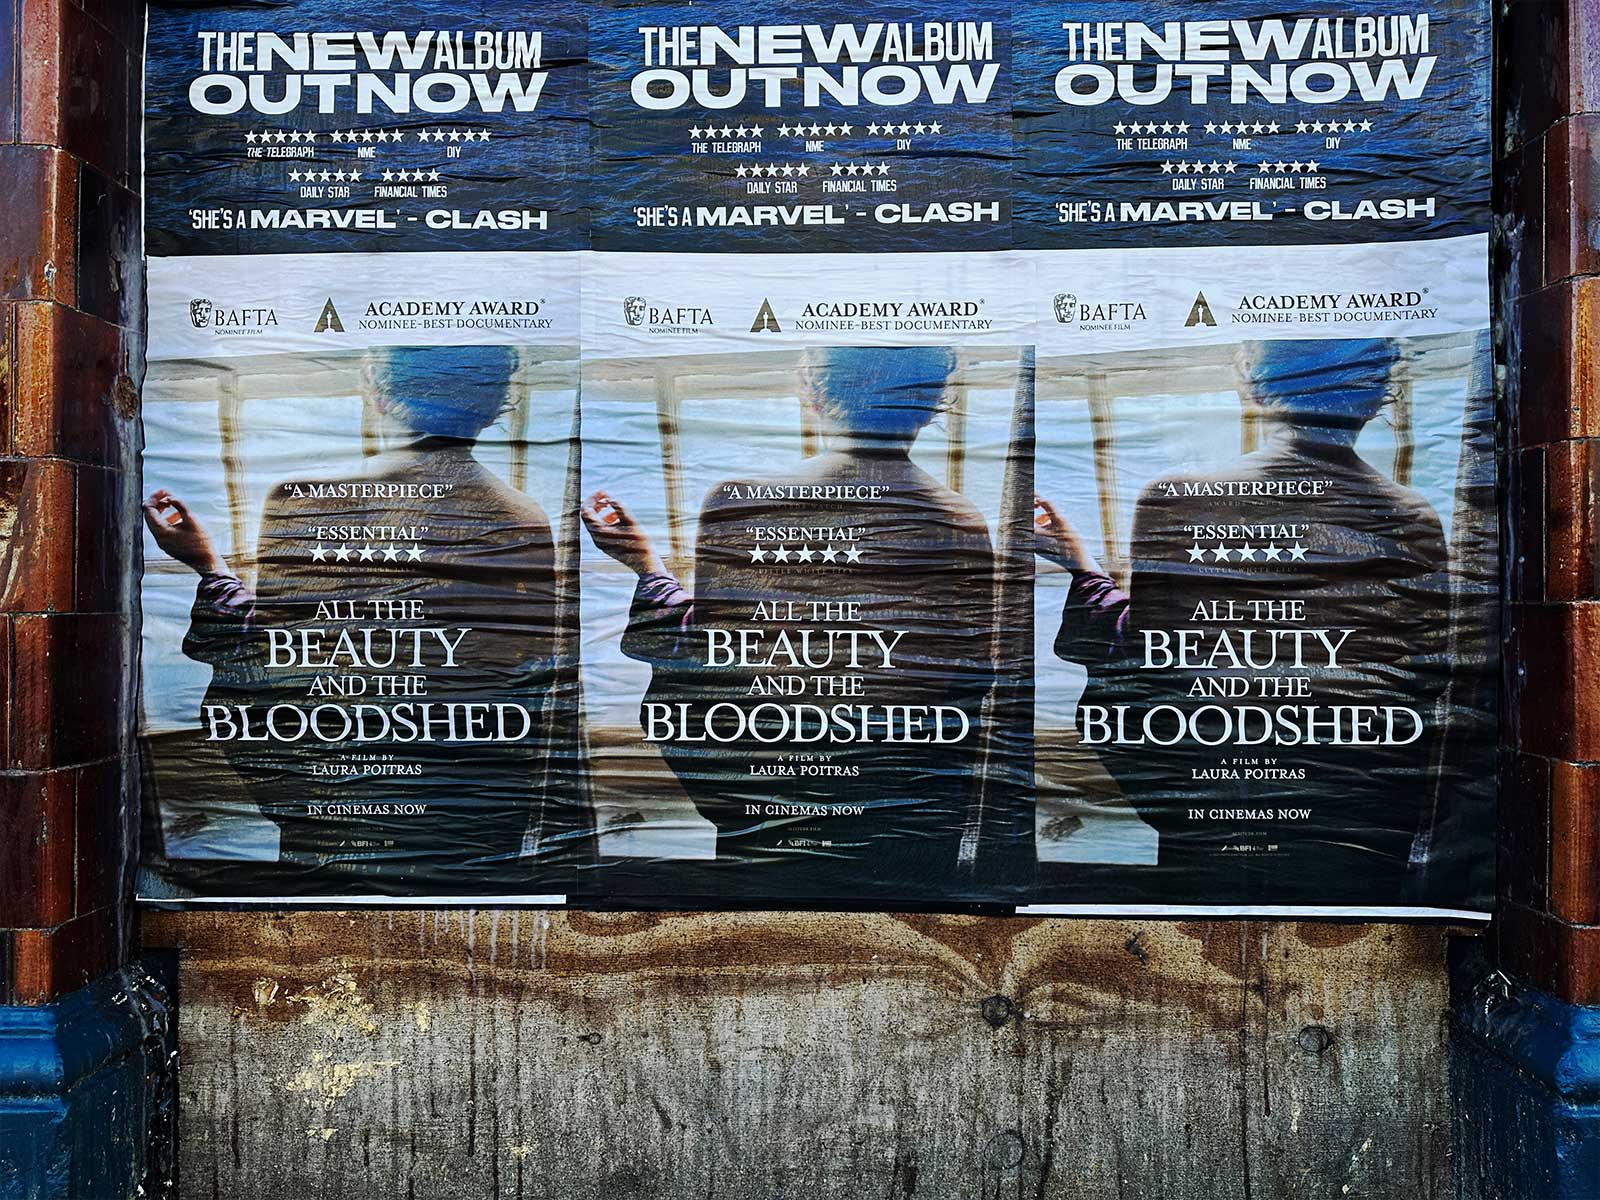 All The Beauty and the Bloodshed - flyposting - London